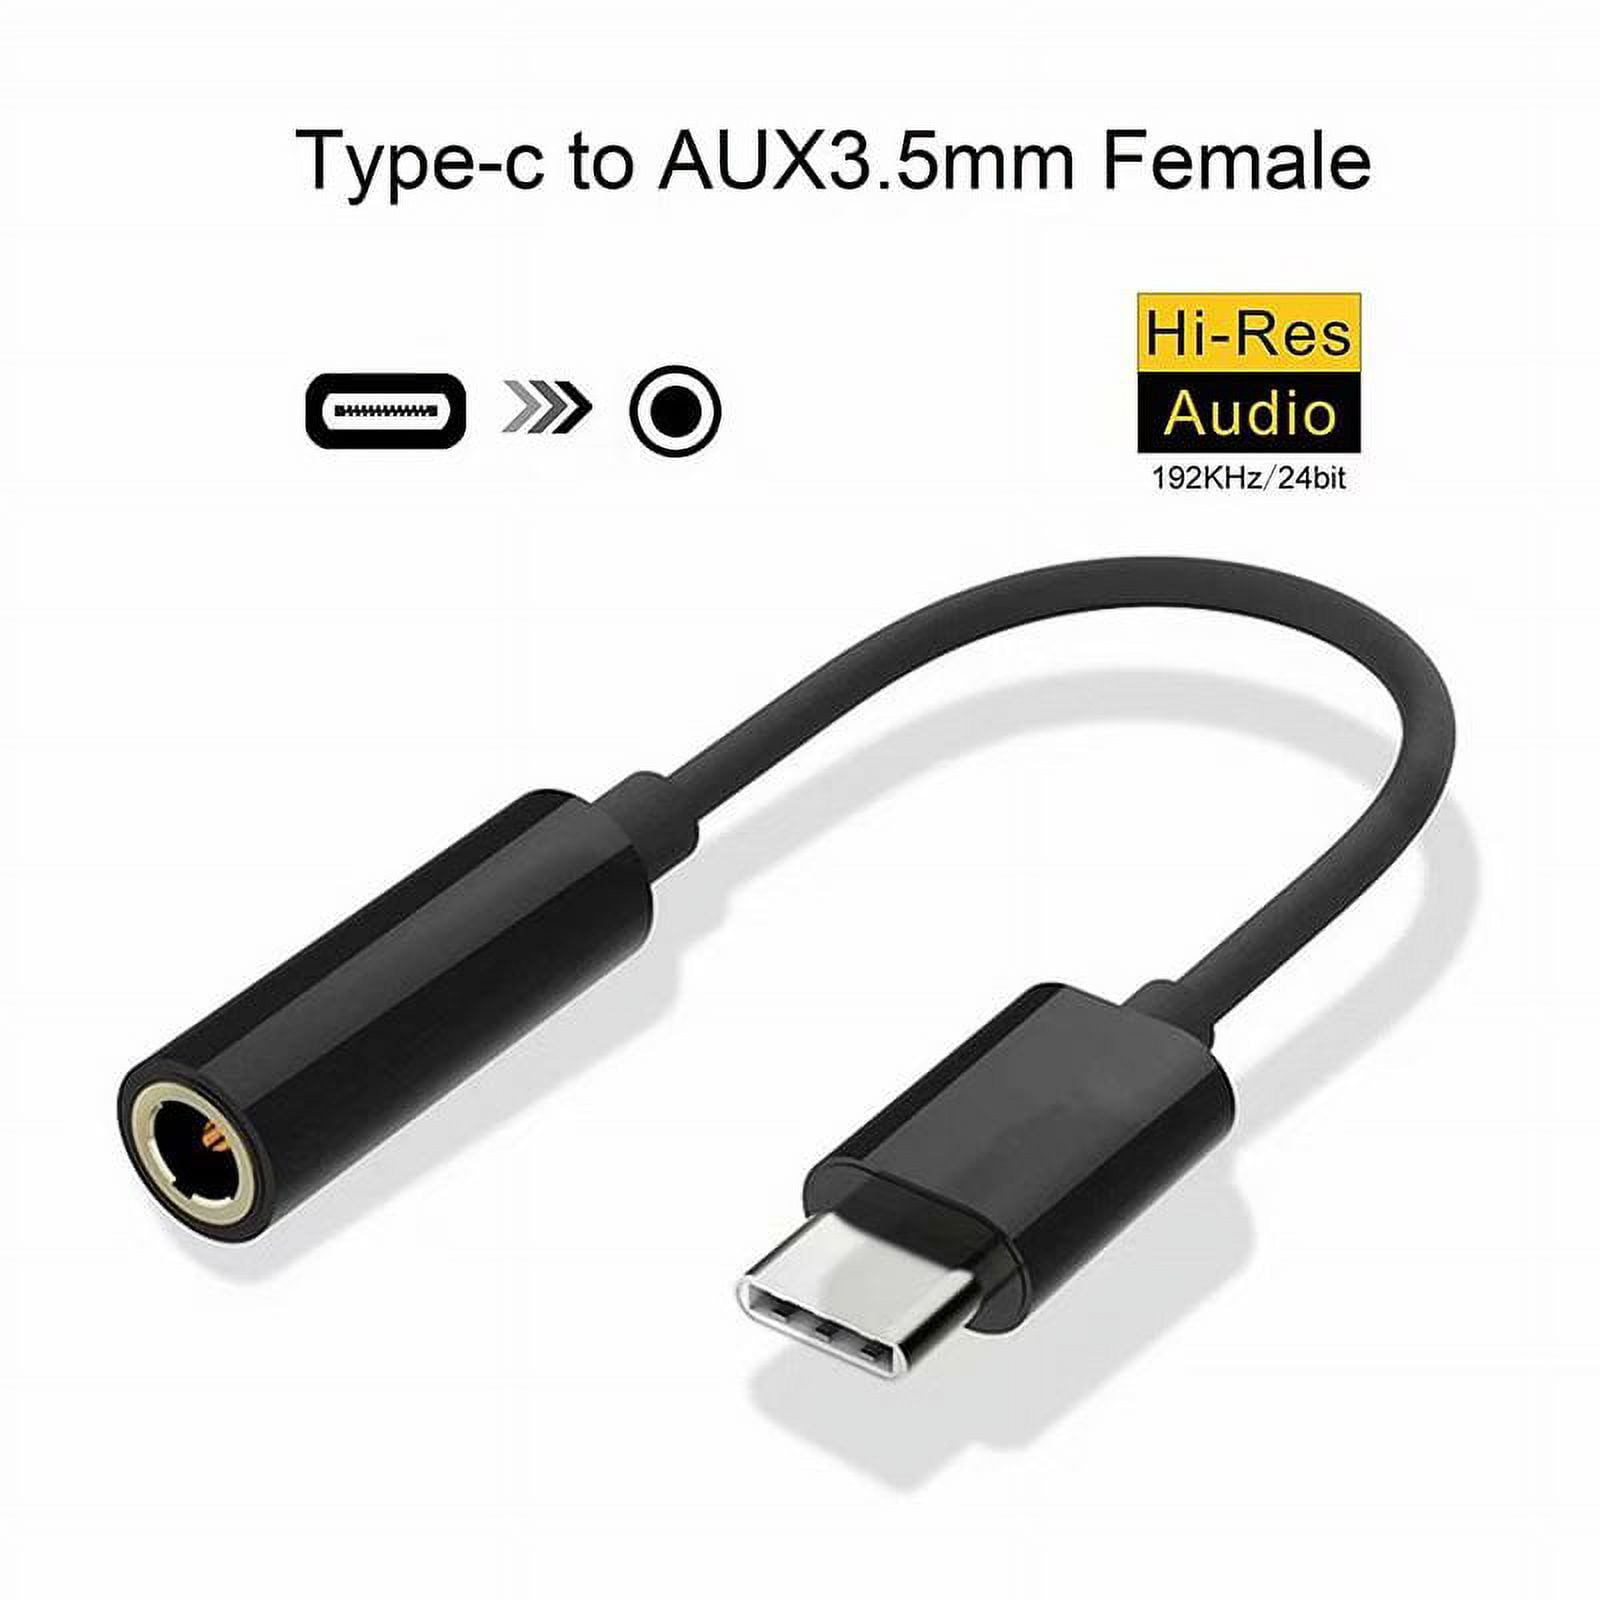  Cellet 3.5mm Aux Audio Adapter USB-C, Type-C USB Enhanced  Quality Sound Compatible to iPad, iPad Pro, iPad Air, Samsung Galaxy,  Google Pixels, MacBook Pro Air (USB-C to Audio & Power Adapter) 